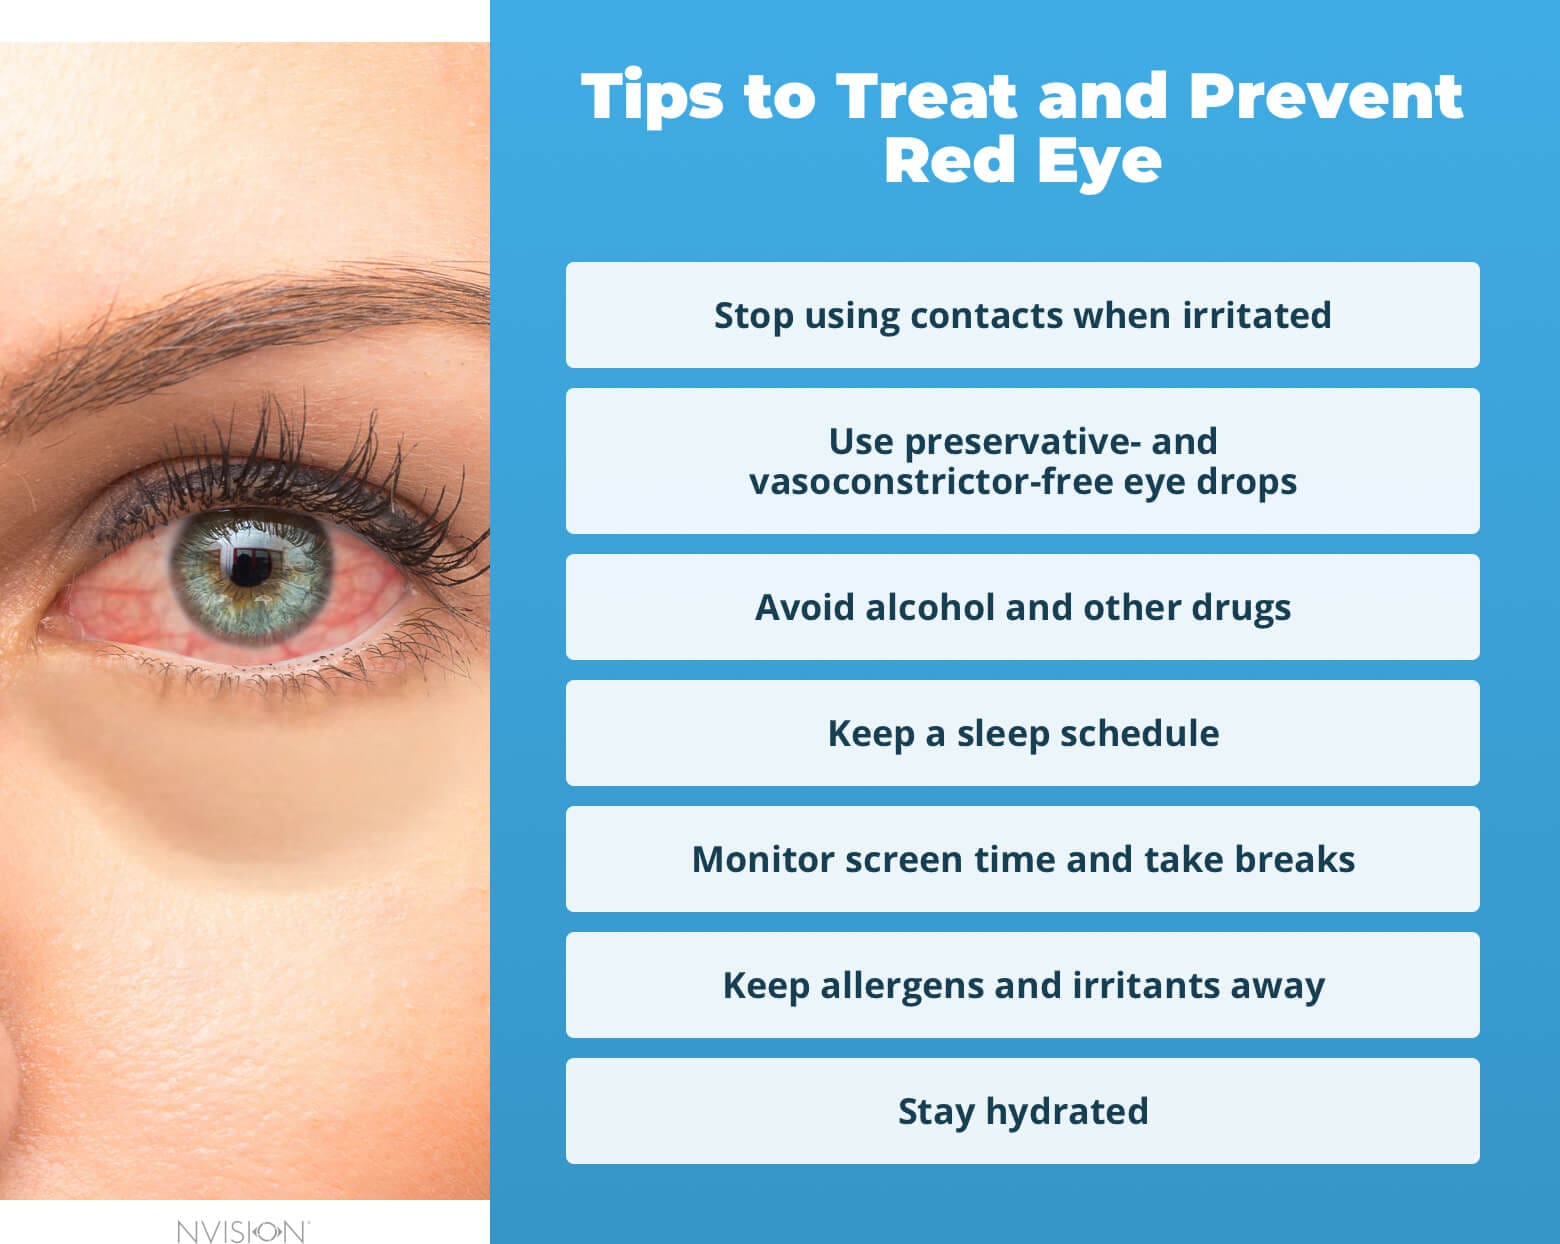 https://www.nvisioncenters.com/wp-content/uploads/Tips-to-Treat-and-Prevent-Red-Eye@2x.jpg